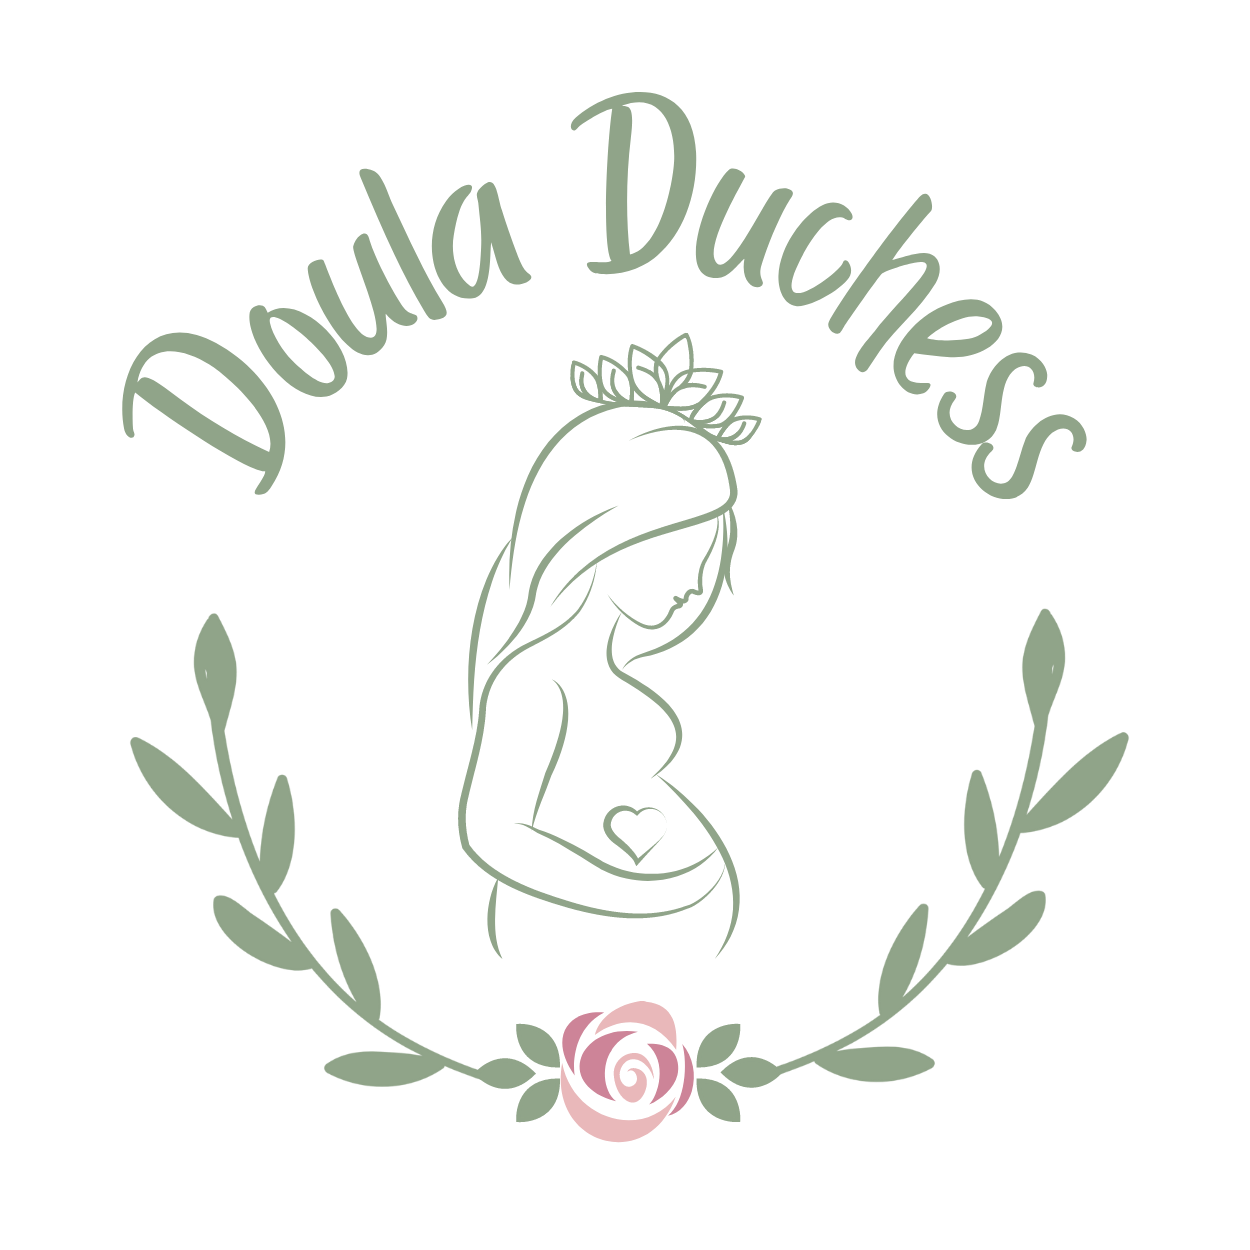 Doula Duchess: Birth Doula Emily Lindgren serving Minneapolis and St. Paul